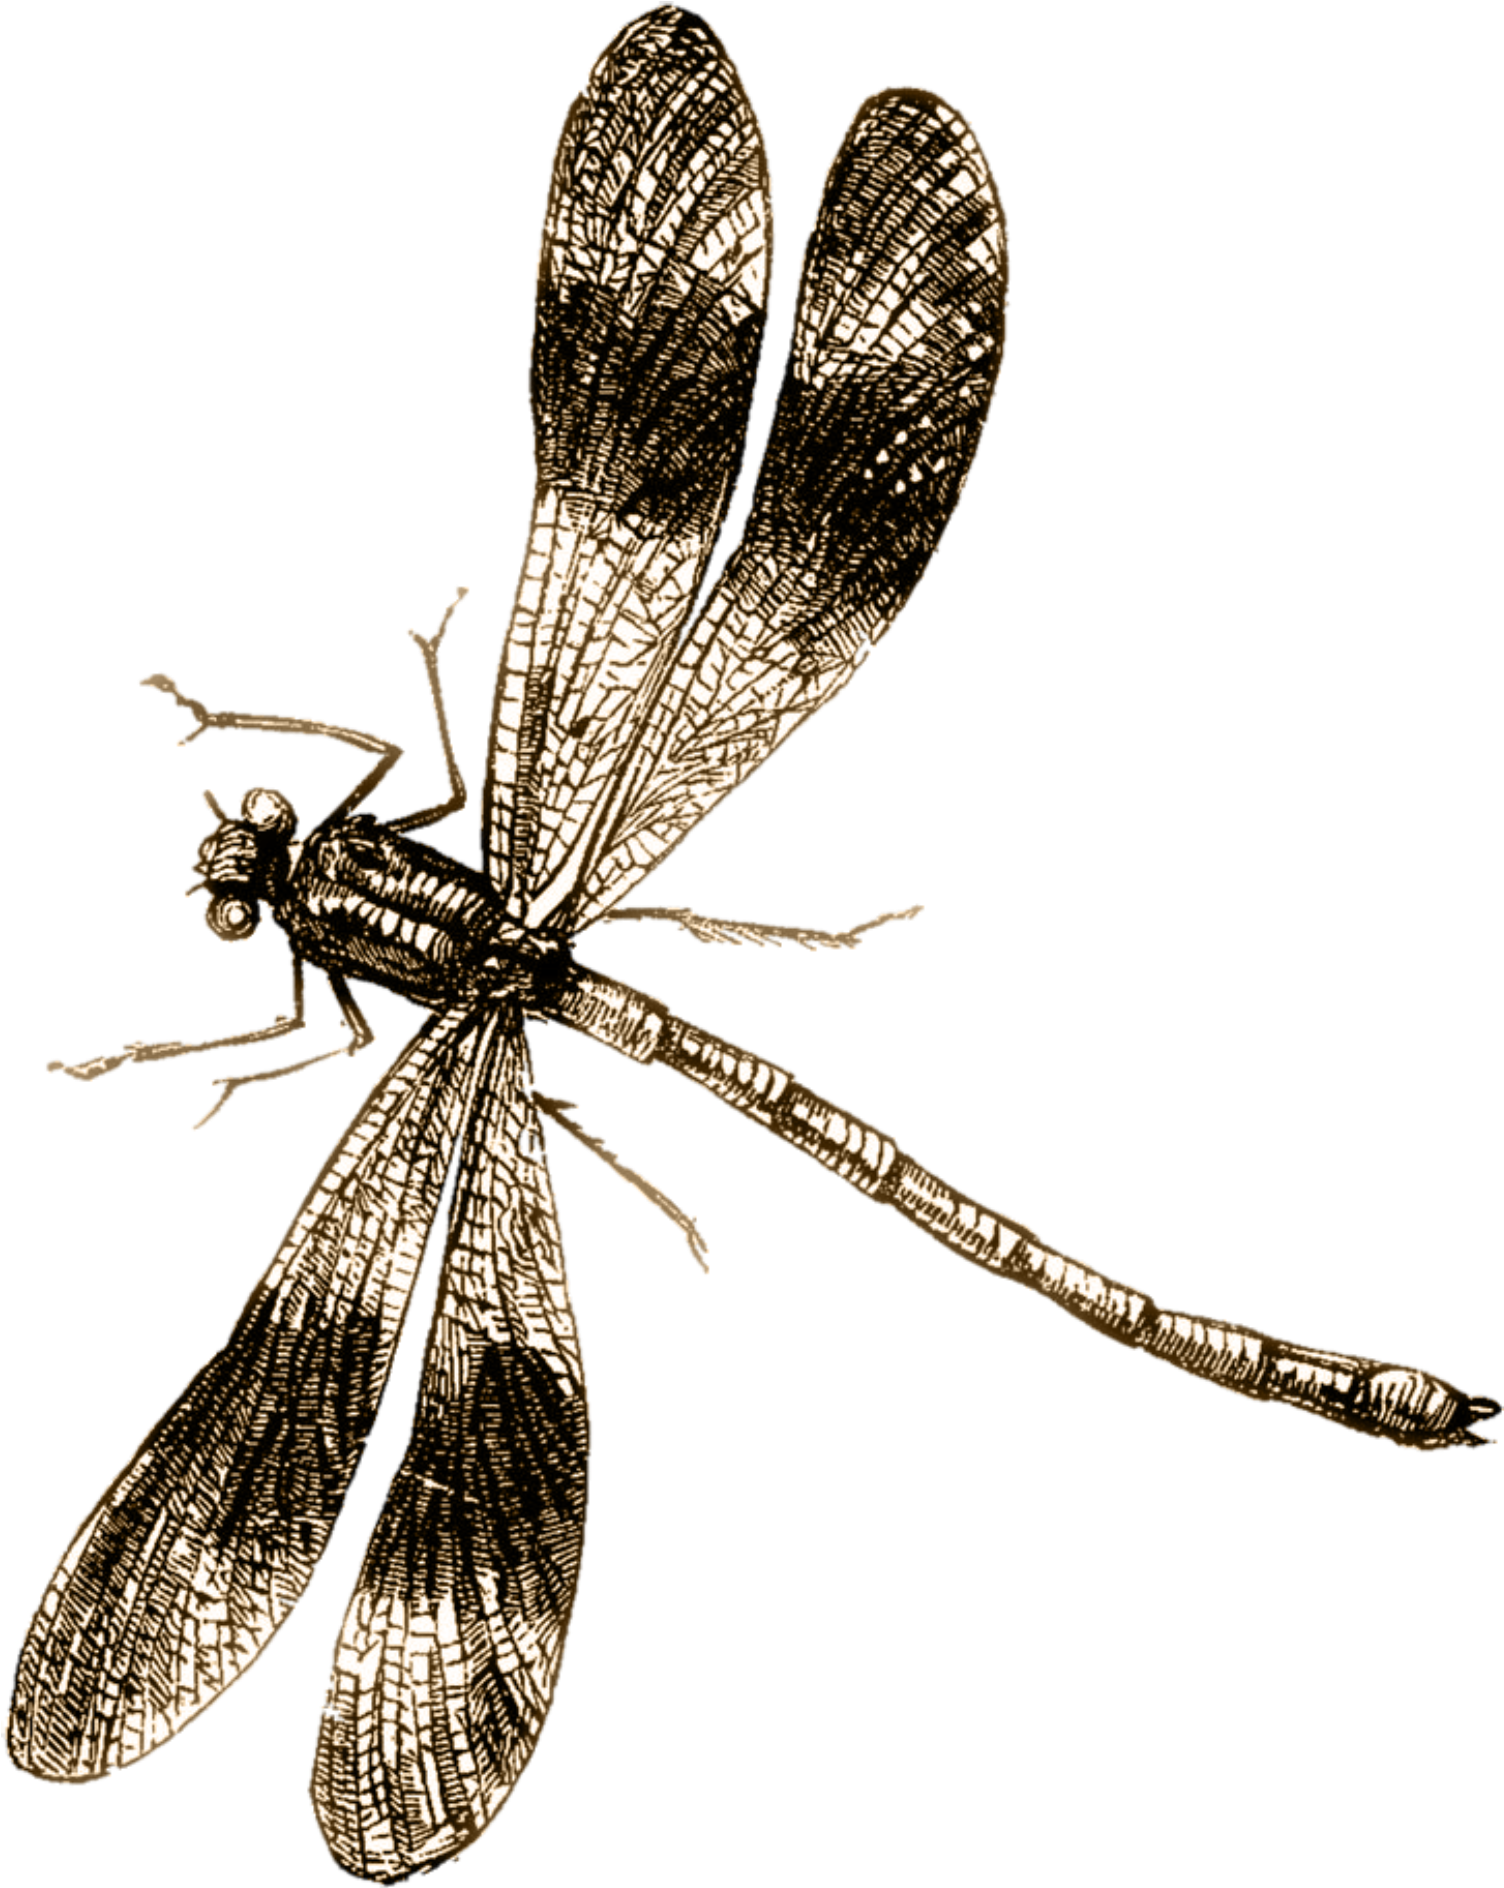 Dragon Fly - Welcome Dragonflies Poster (1523x1920)